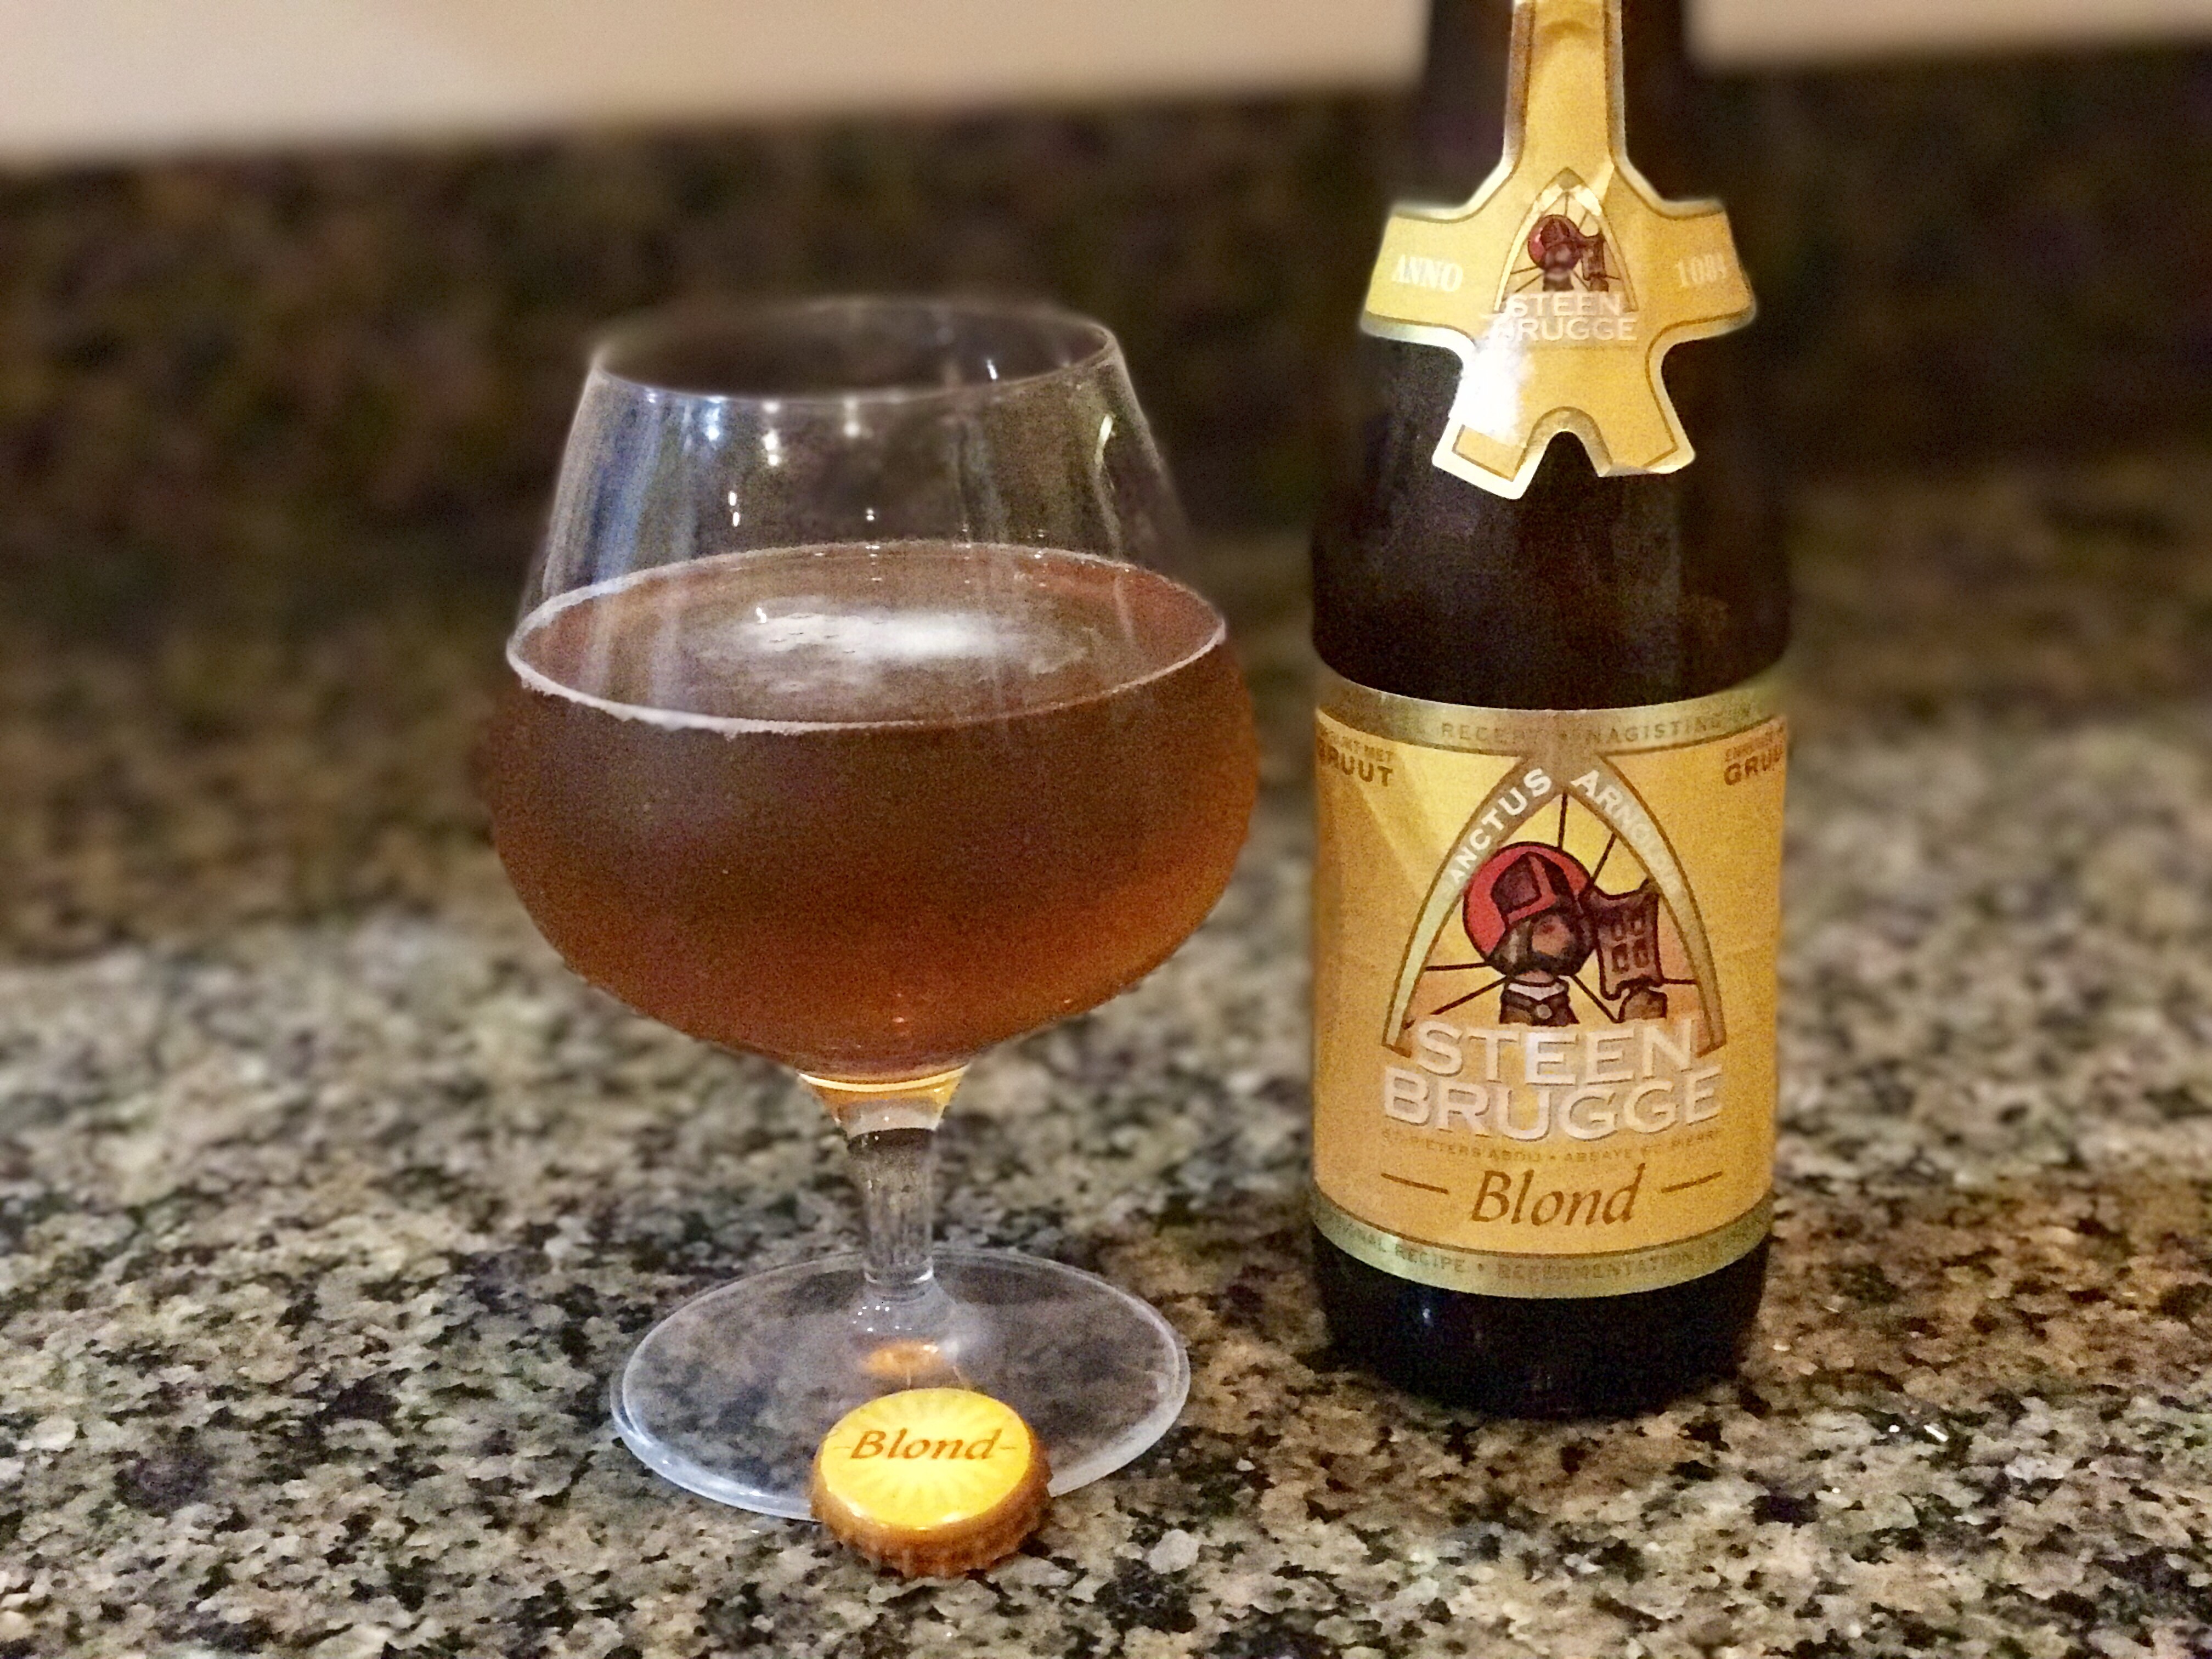 Steenbrugge – Blond by Brouwerij Palm NV